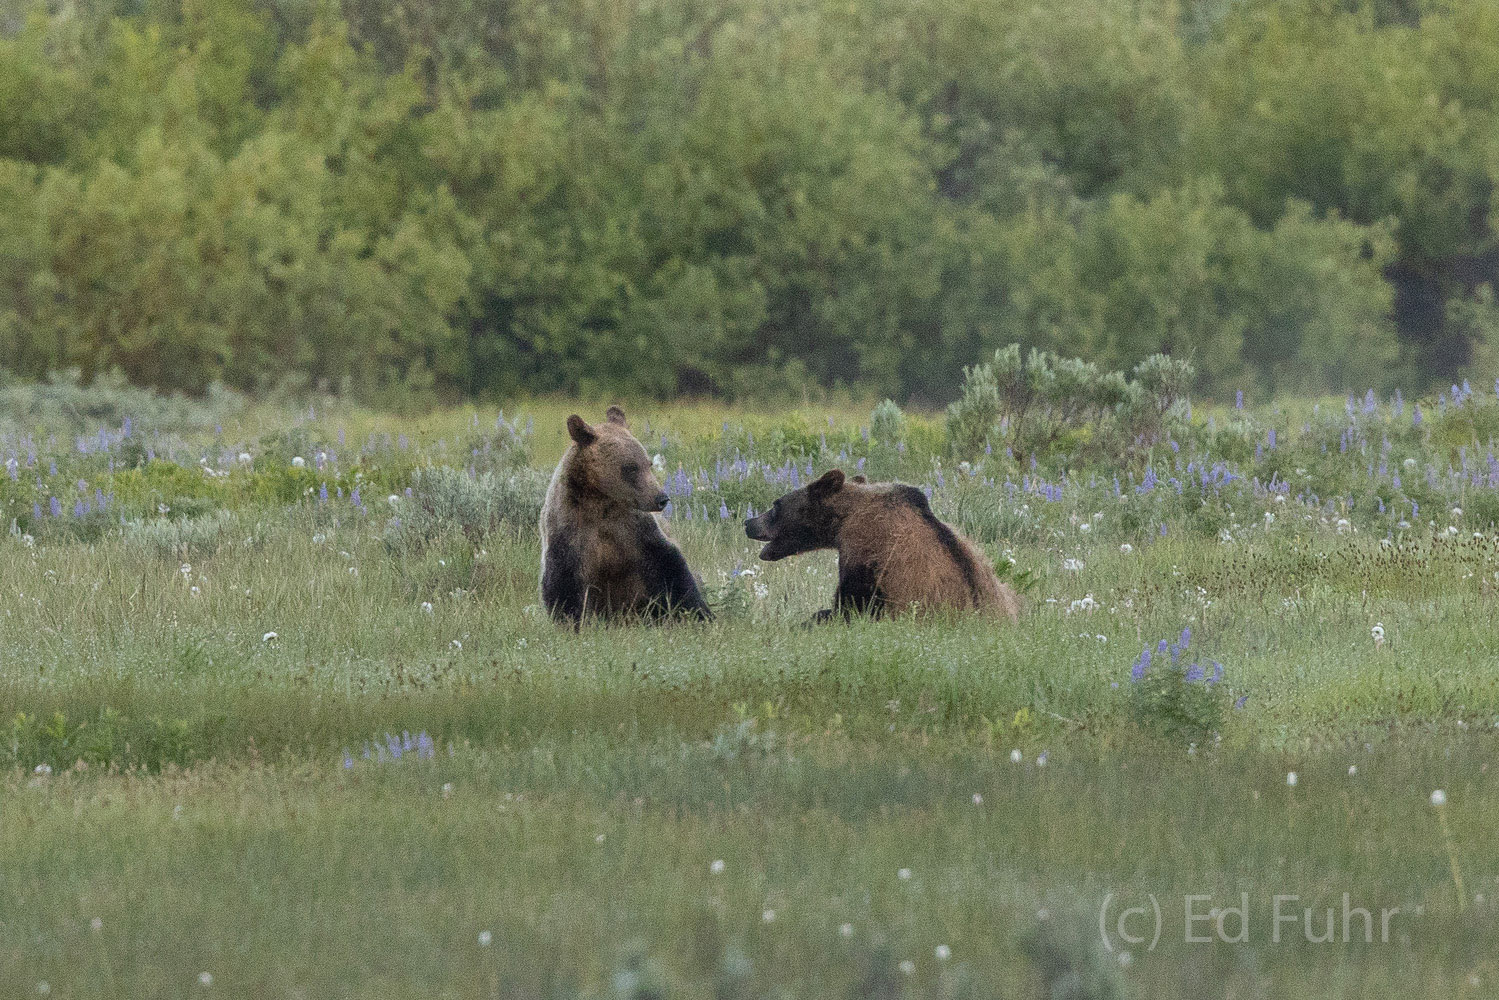 Two subadult cubs of Grizzly 610 play in a far off meadow.